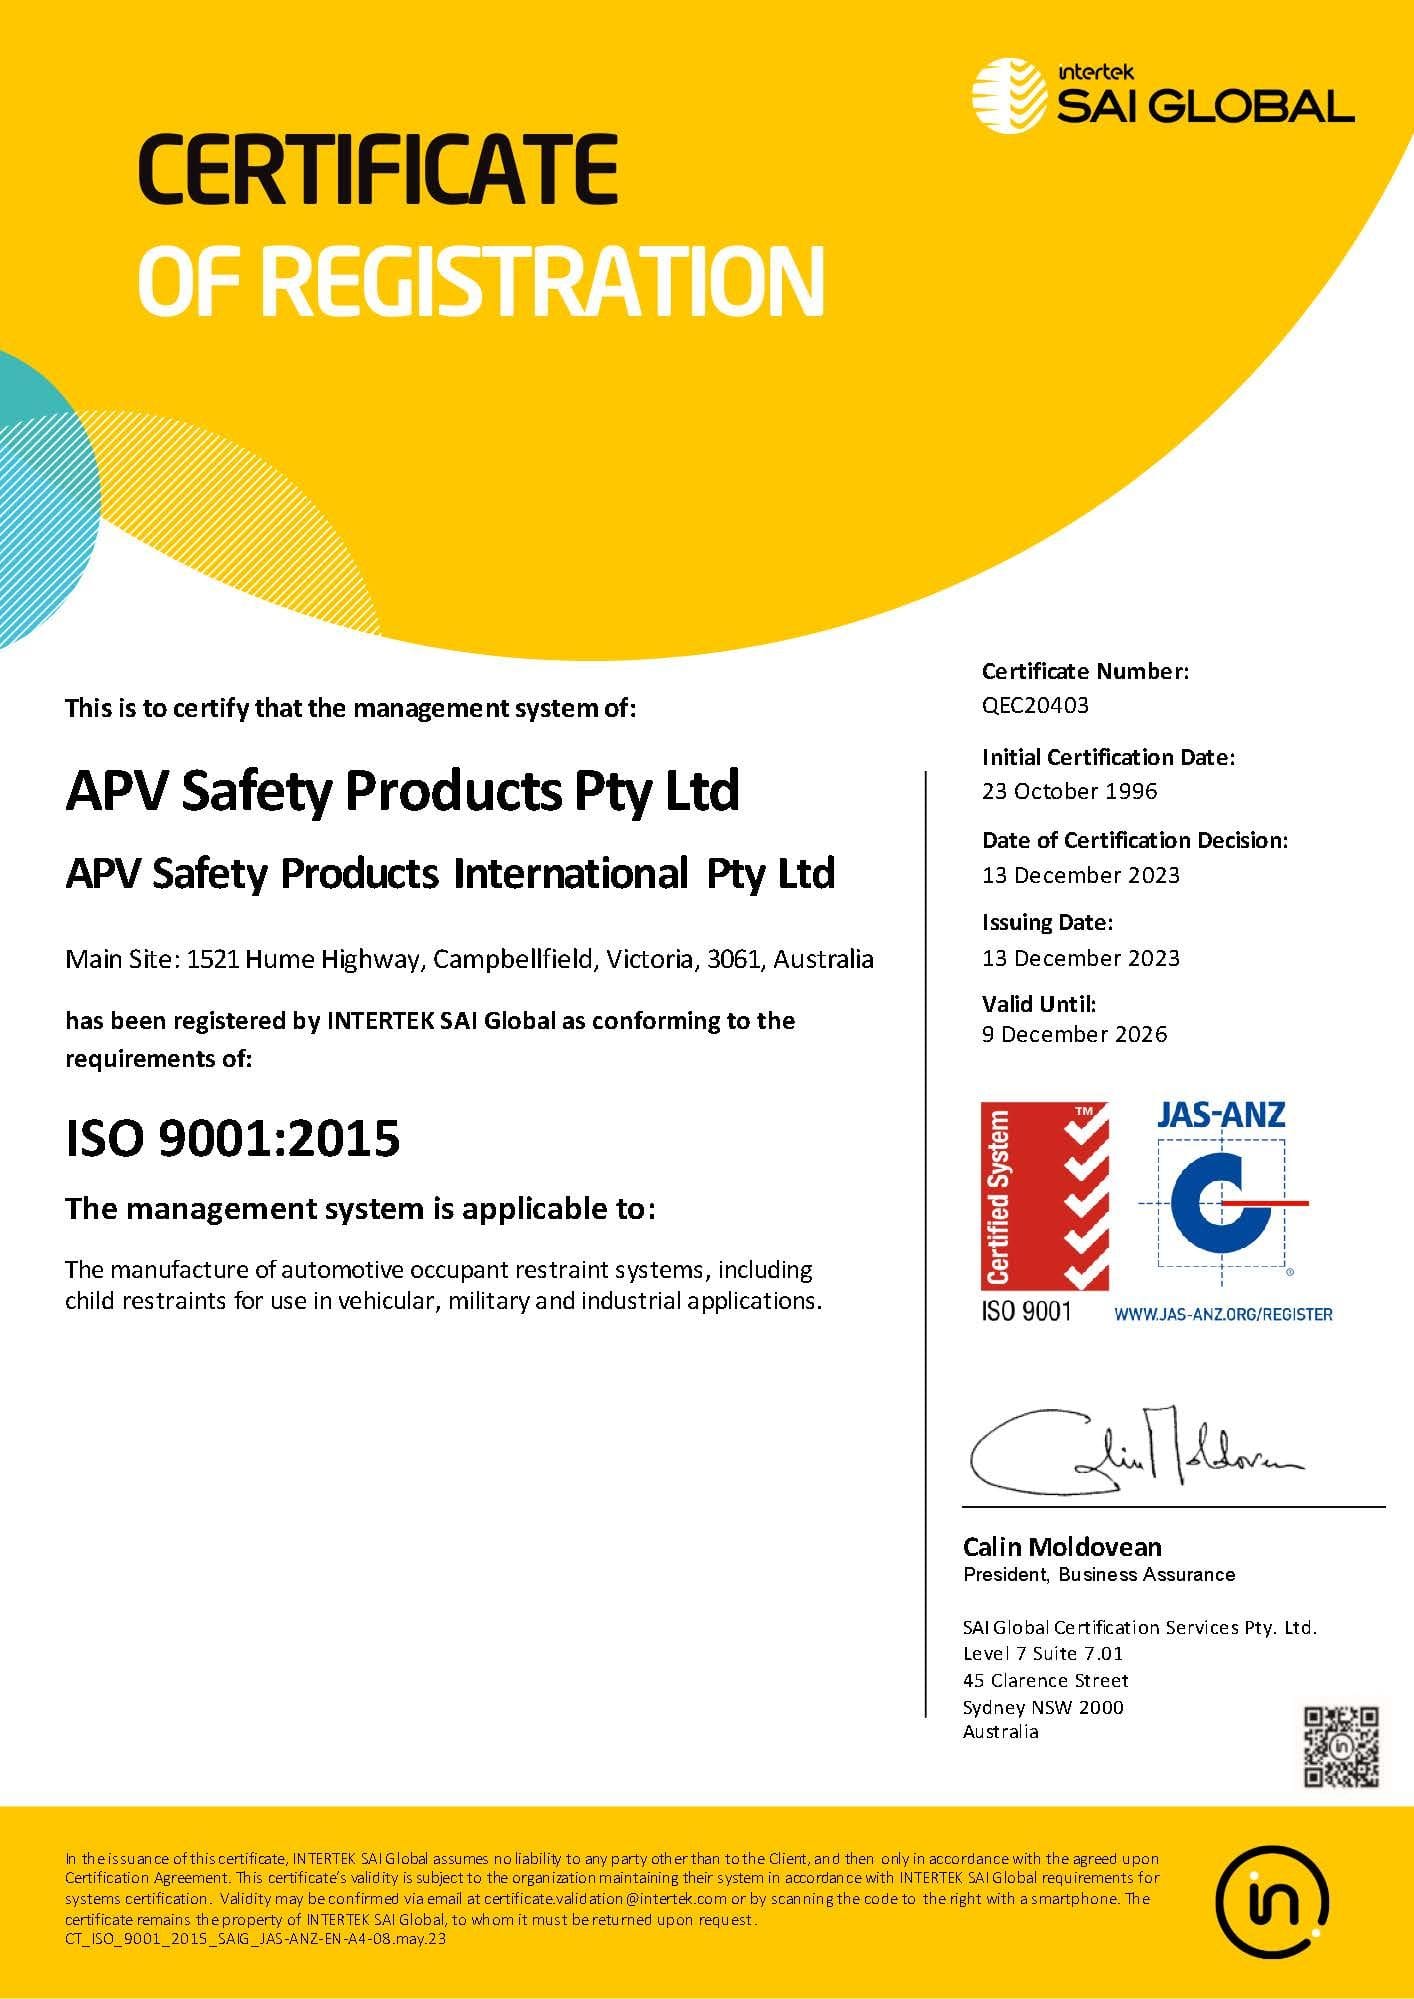 APV Safety Products ISO 9001:2015